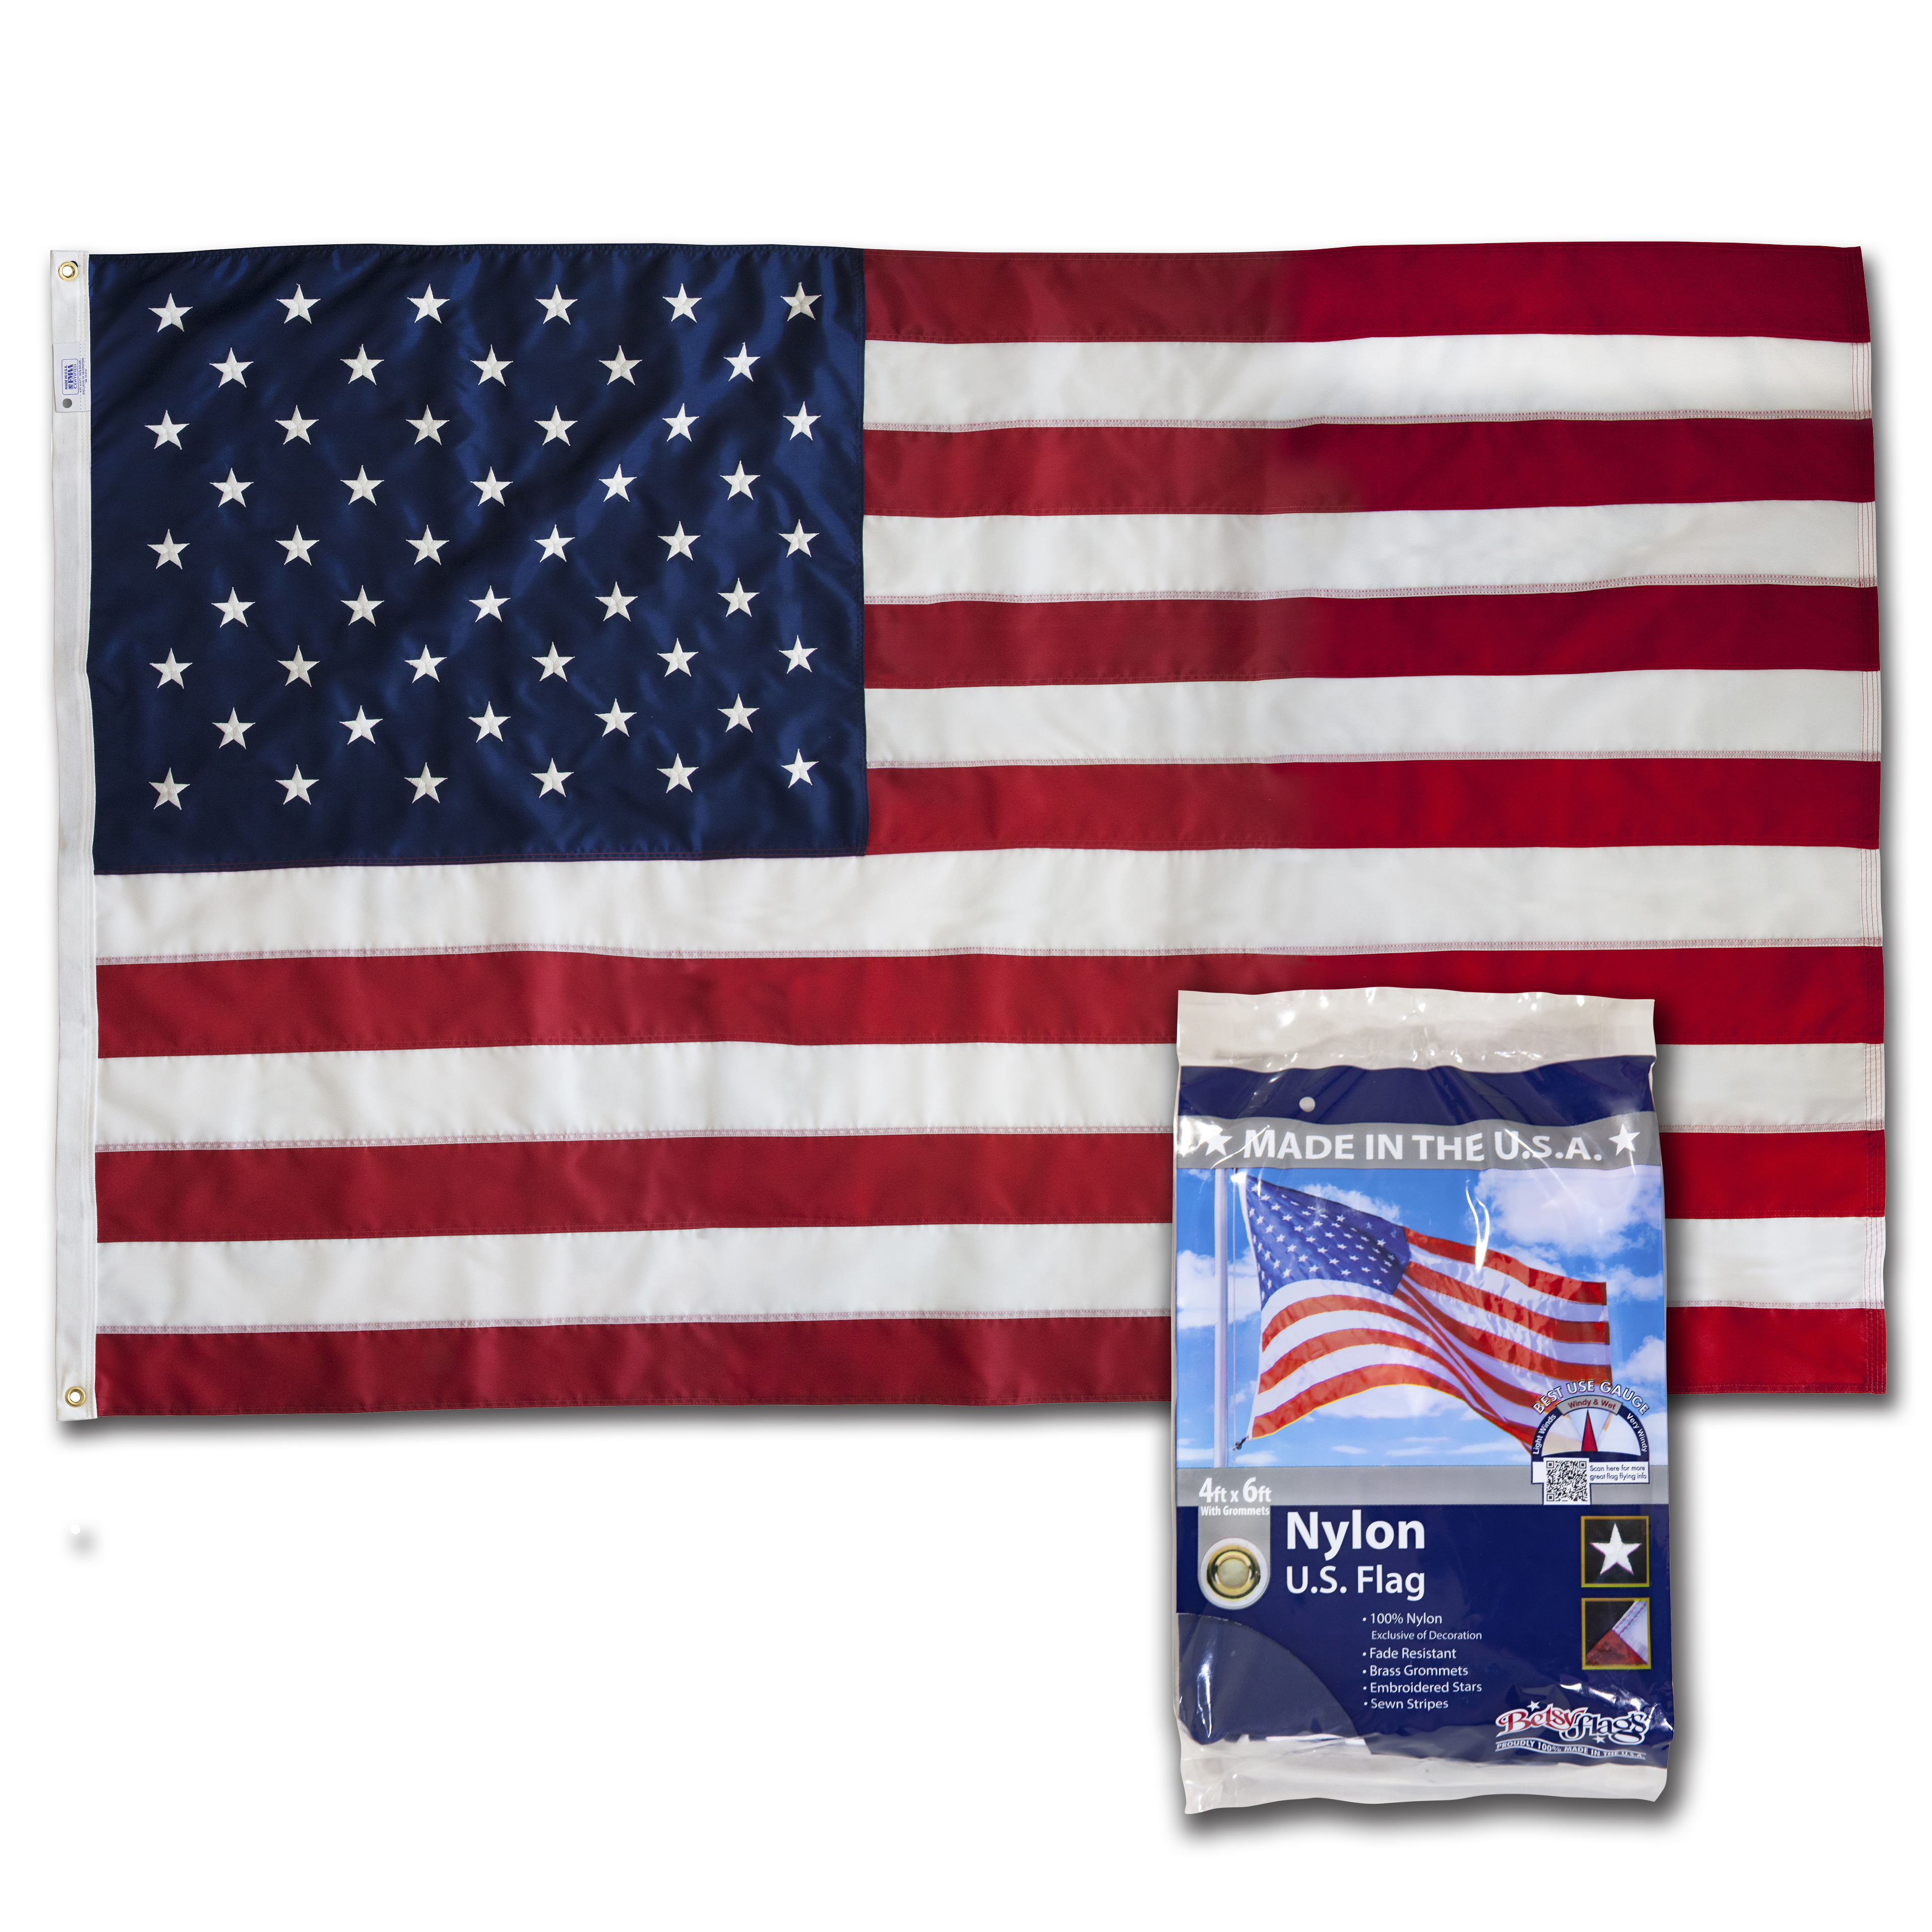 American Nylon Sewn and Embroidered Flag with Brass Grommets by Betsy Flags, 4' x 6' - image 1 of 7